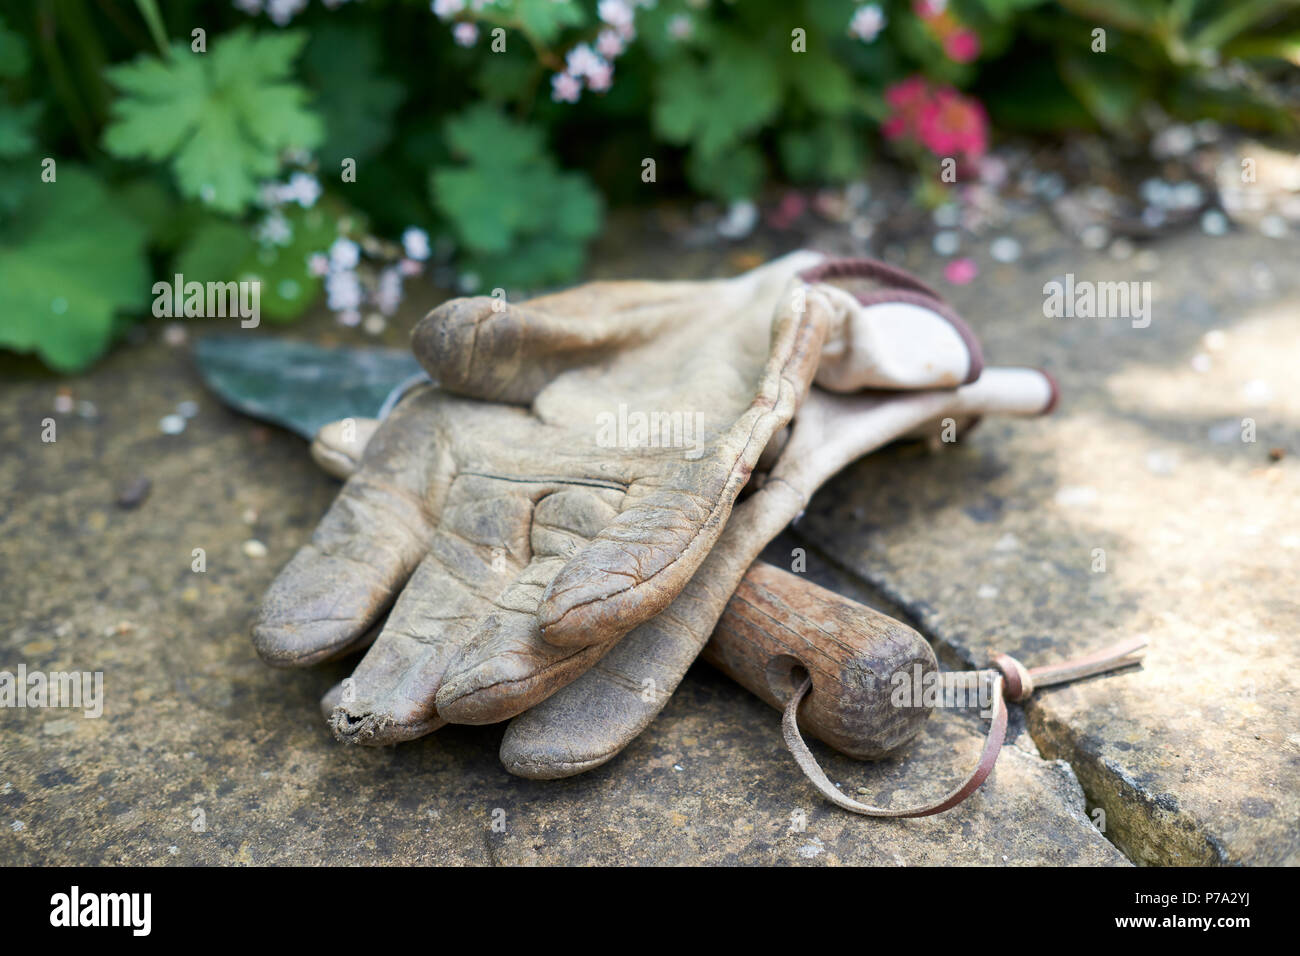 Leather gardening gloves and a wooden handled gardening trowel on a garden wall in Summer, UK. Stock Photo